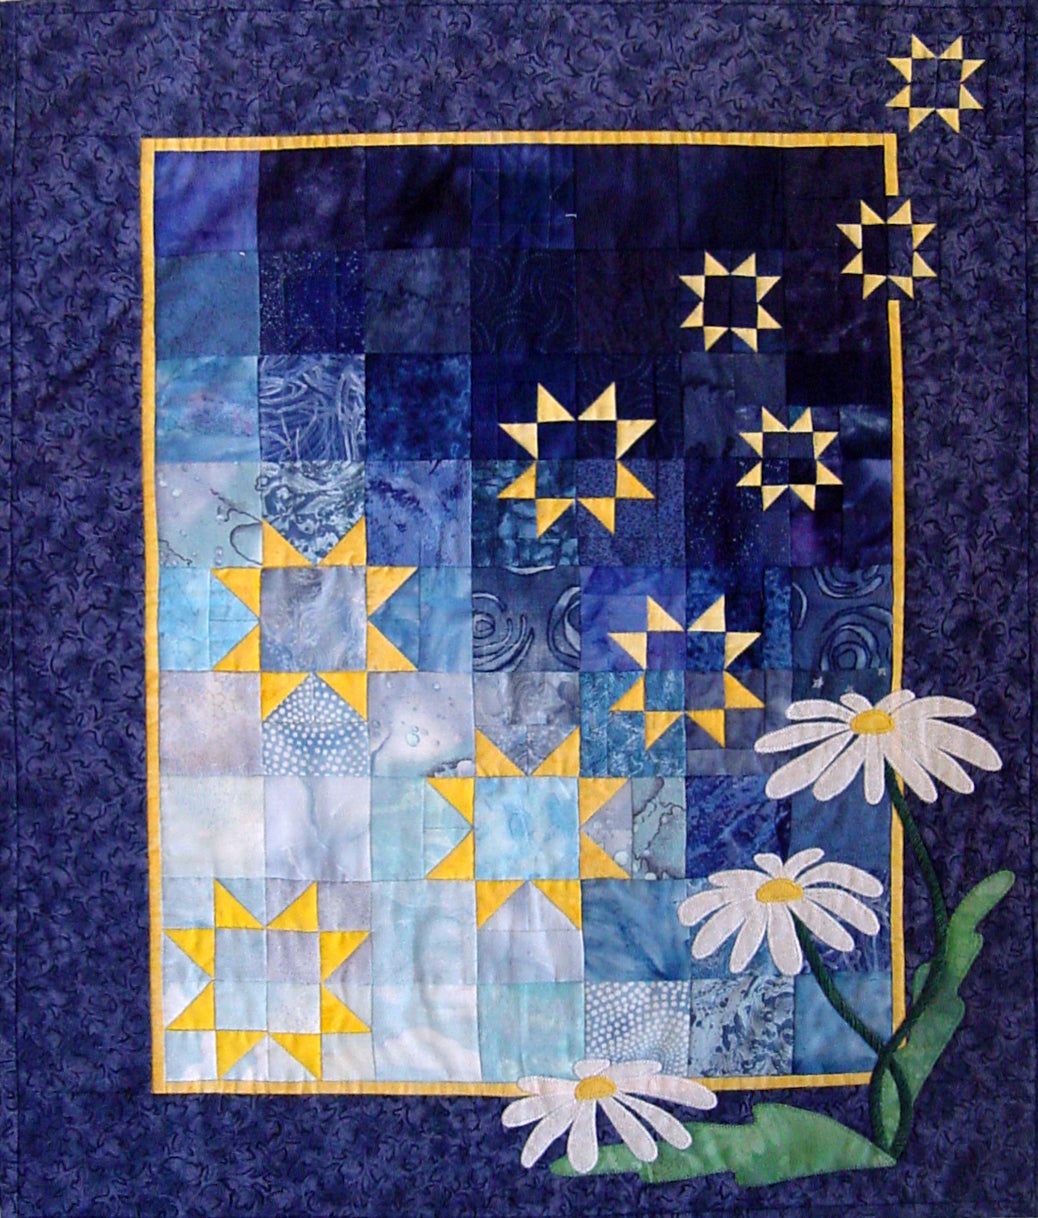 patchwork background of star shaped with appliqued daisies - this quilt pattern is designed by Ruth Blanchet